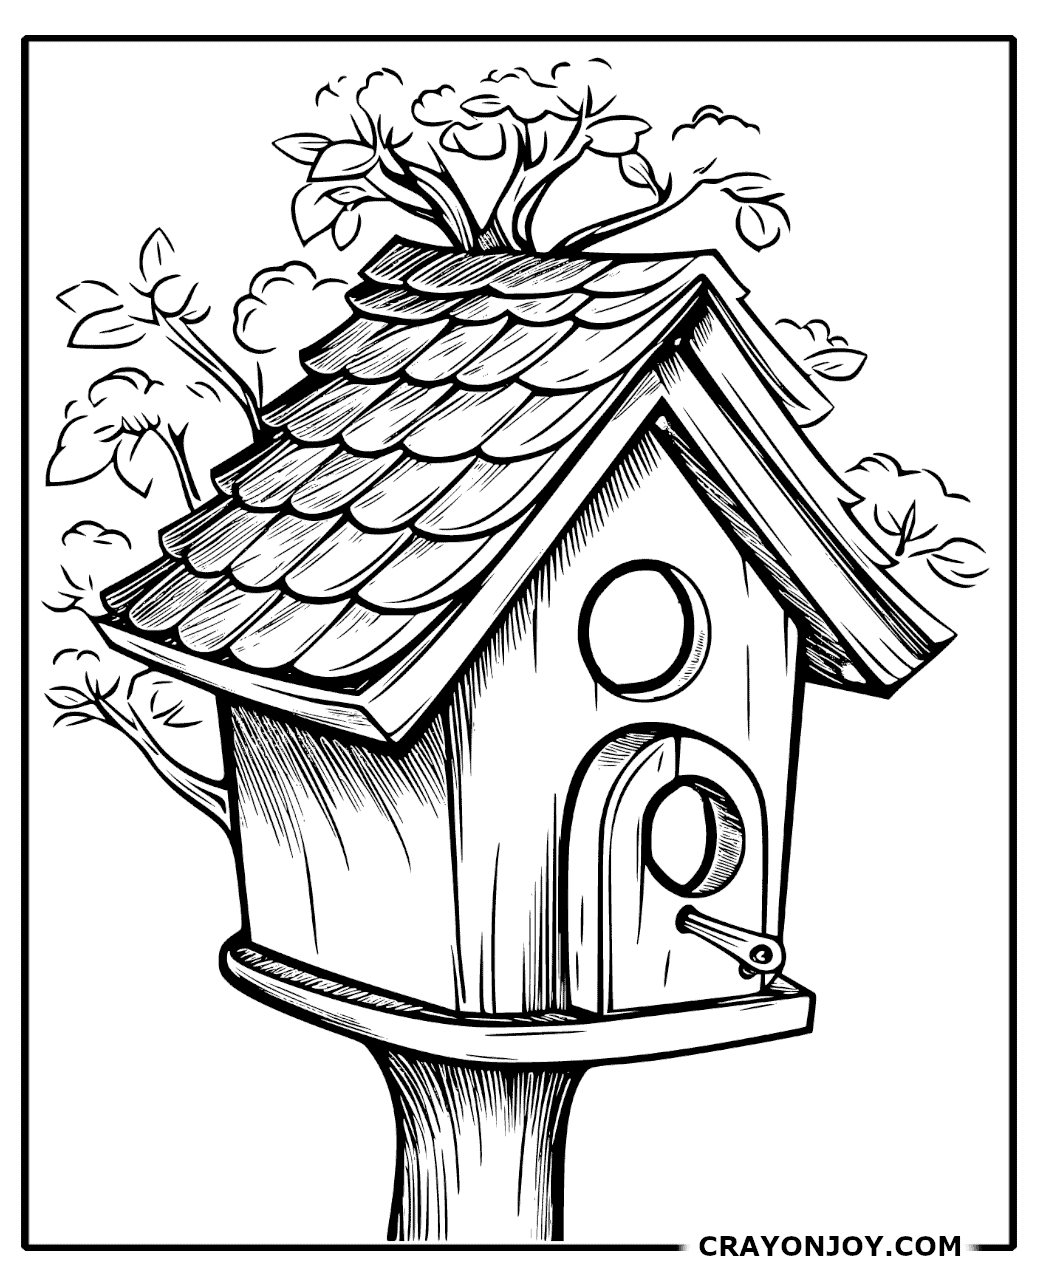 Birdhouse Coloring Pages: Free Printable Designs for Kids and Adults